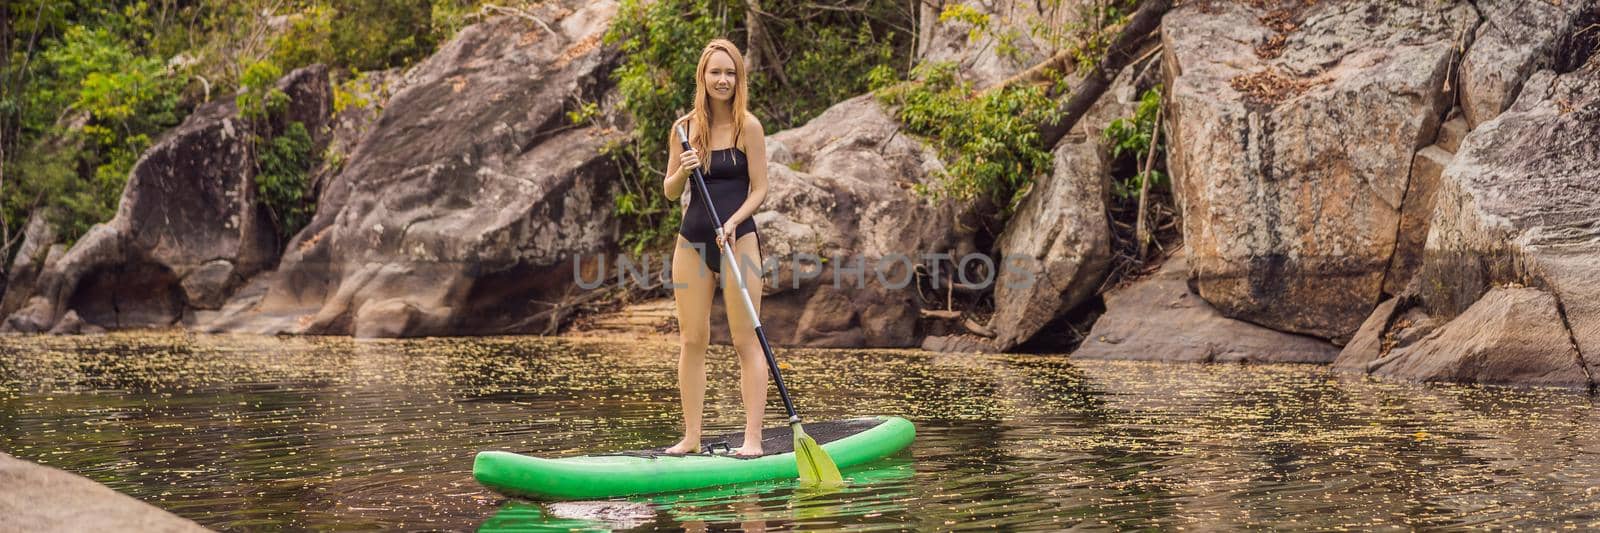 SUP Stand up paddle board woman paddle boarding on lake standing happy on paddleboard on blue water.Action Shot of Young Woman on Paddle Board. BANNER, LONG FORMAT